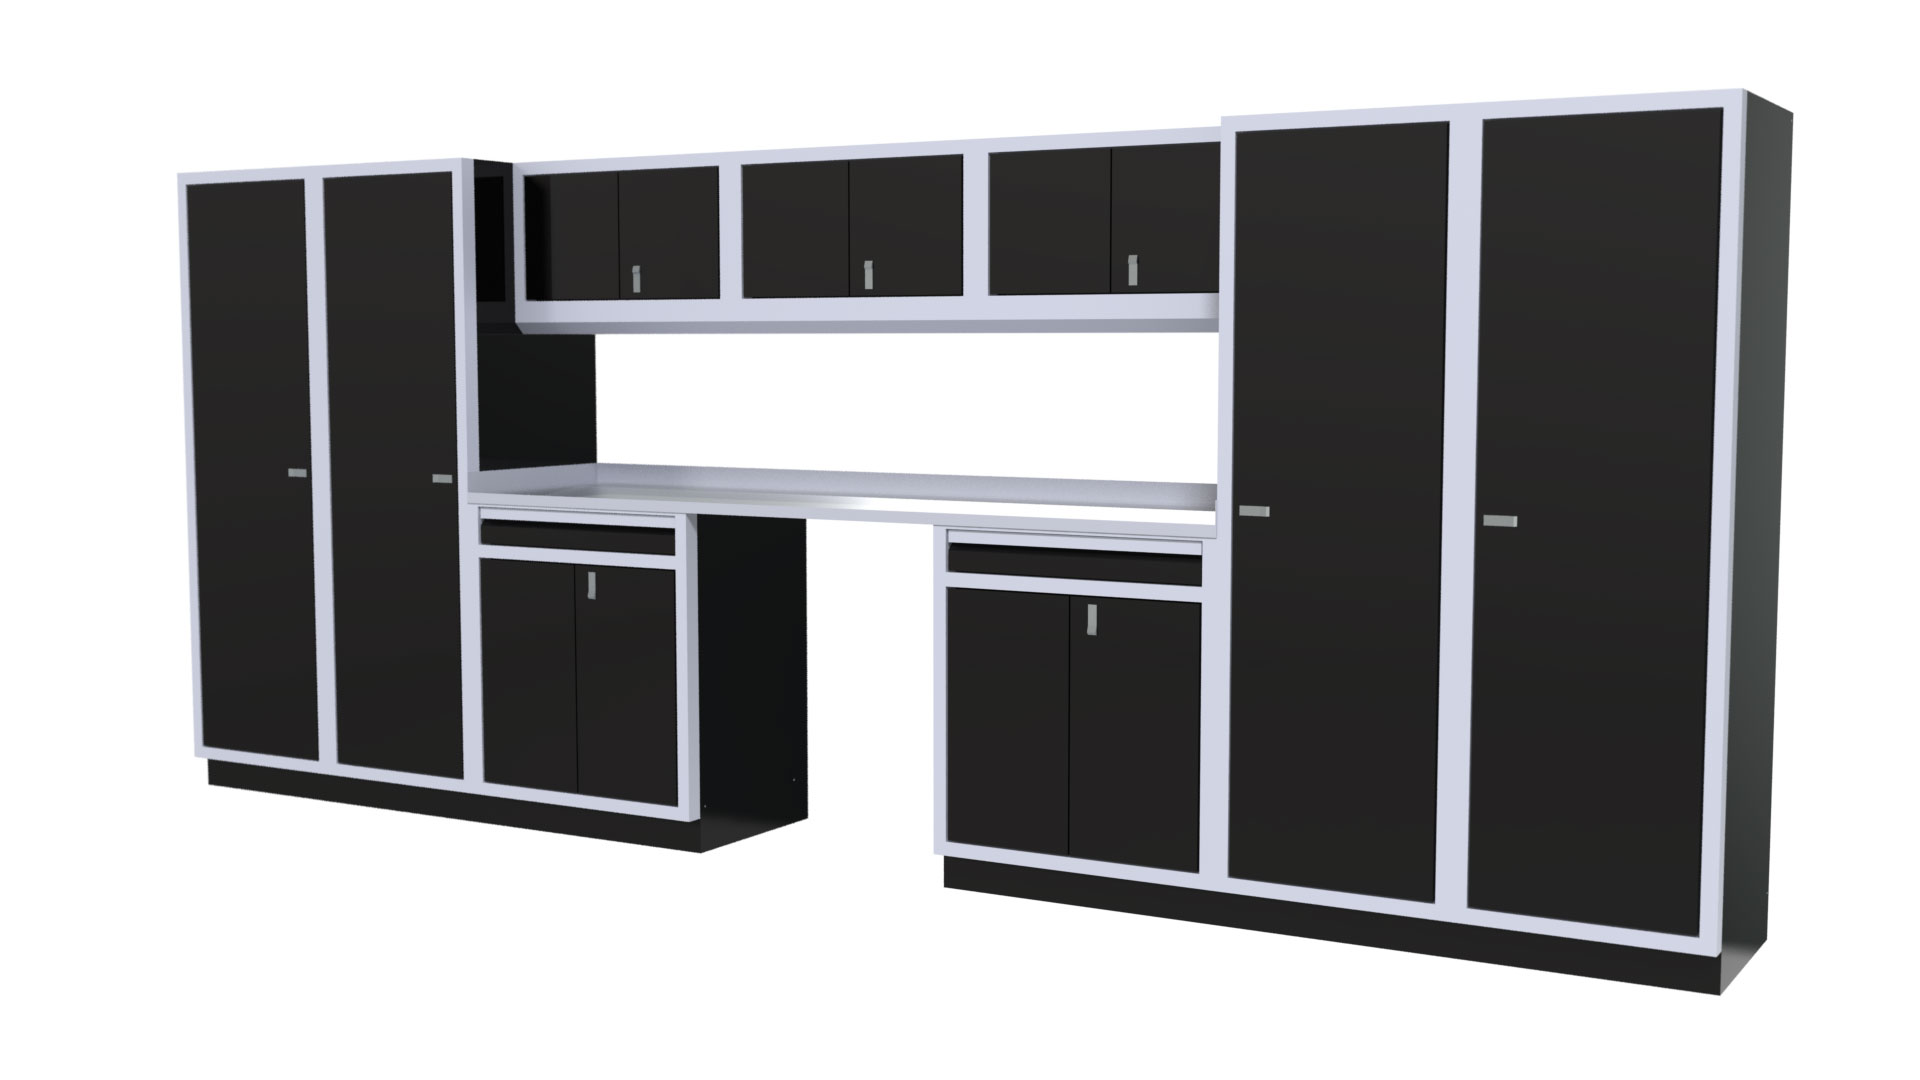 [DISCONTINUED] Moduline 16' Pro-II Base Wall Cabinet Combo 24